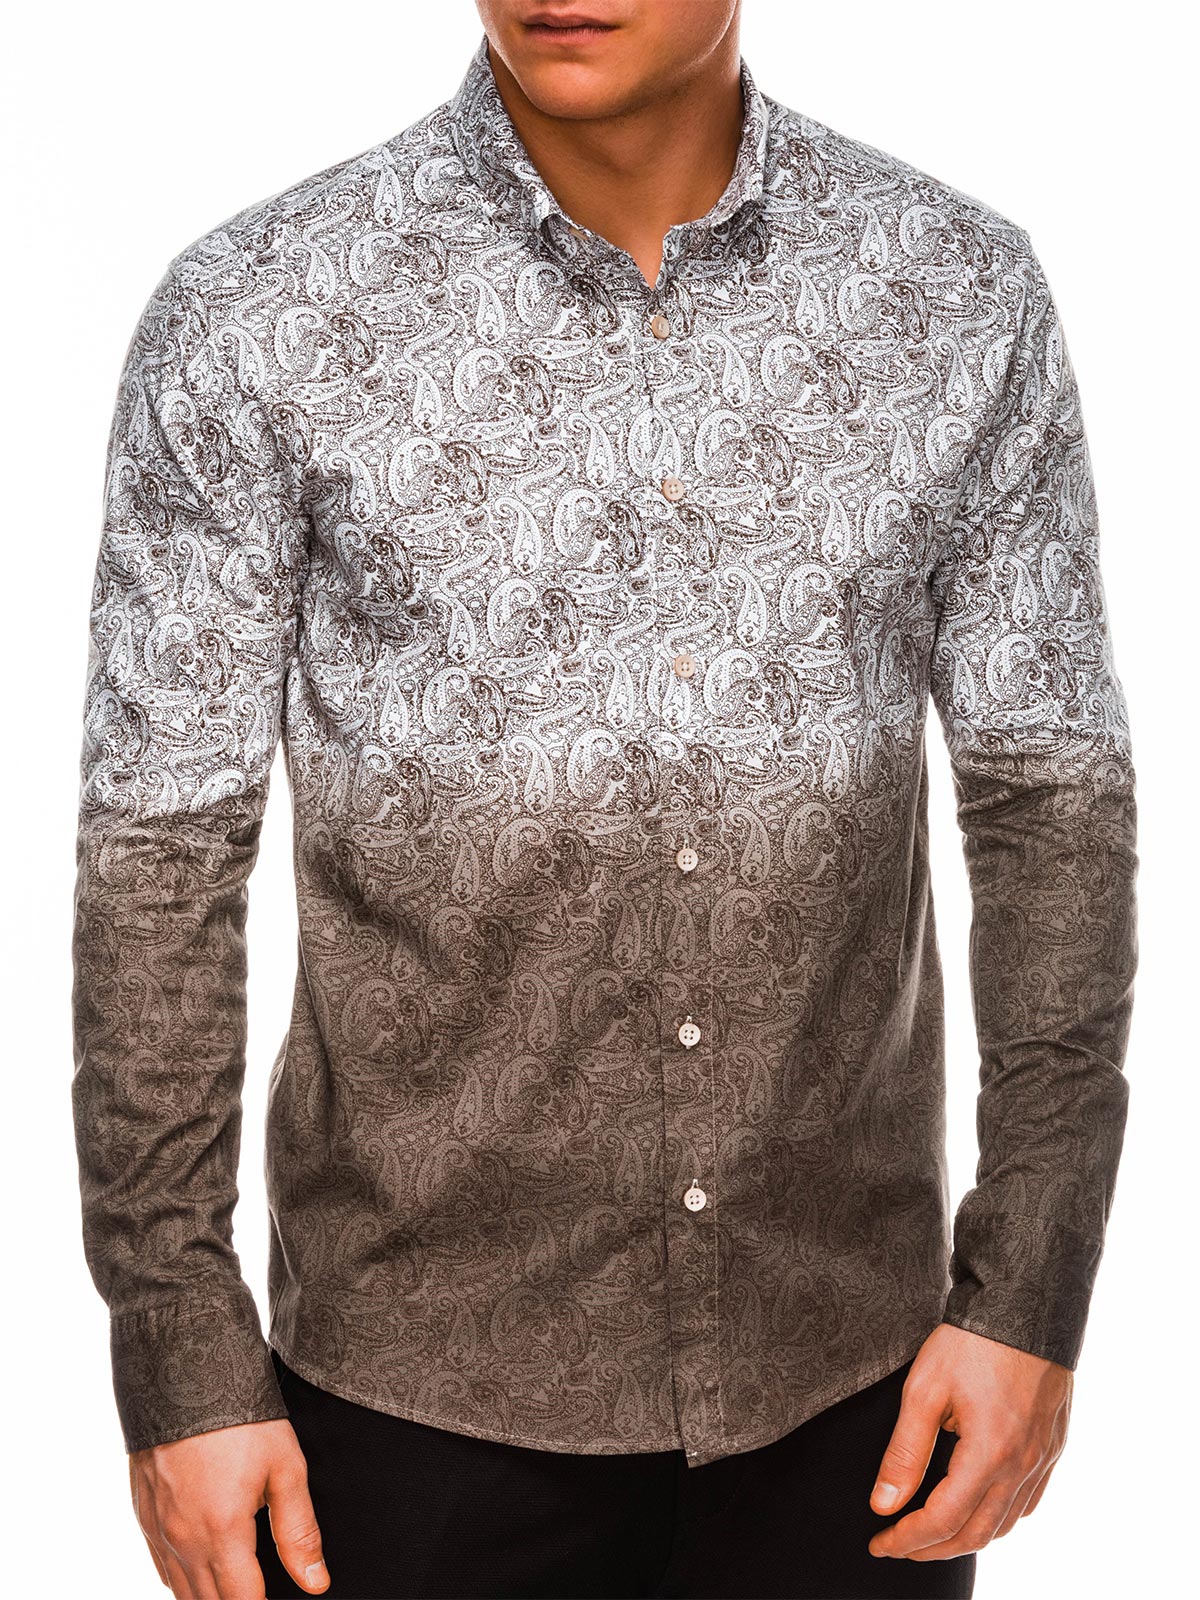 Men's shirt with long sleeves K513 - brown | MODONE wholesale ...